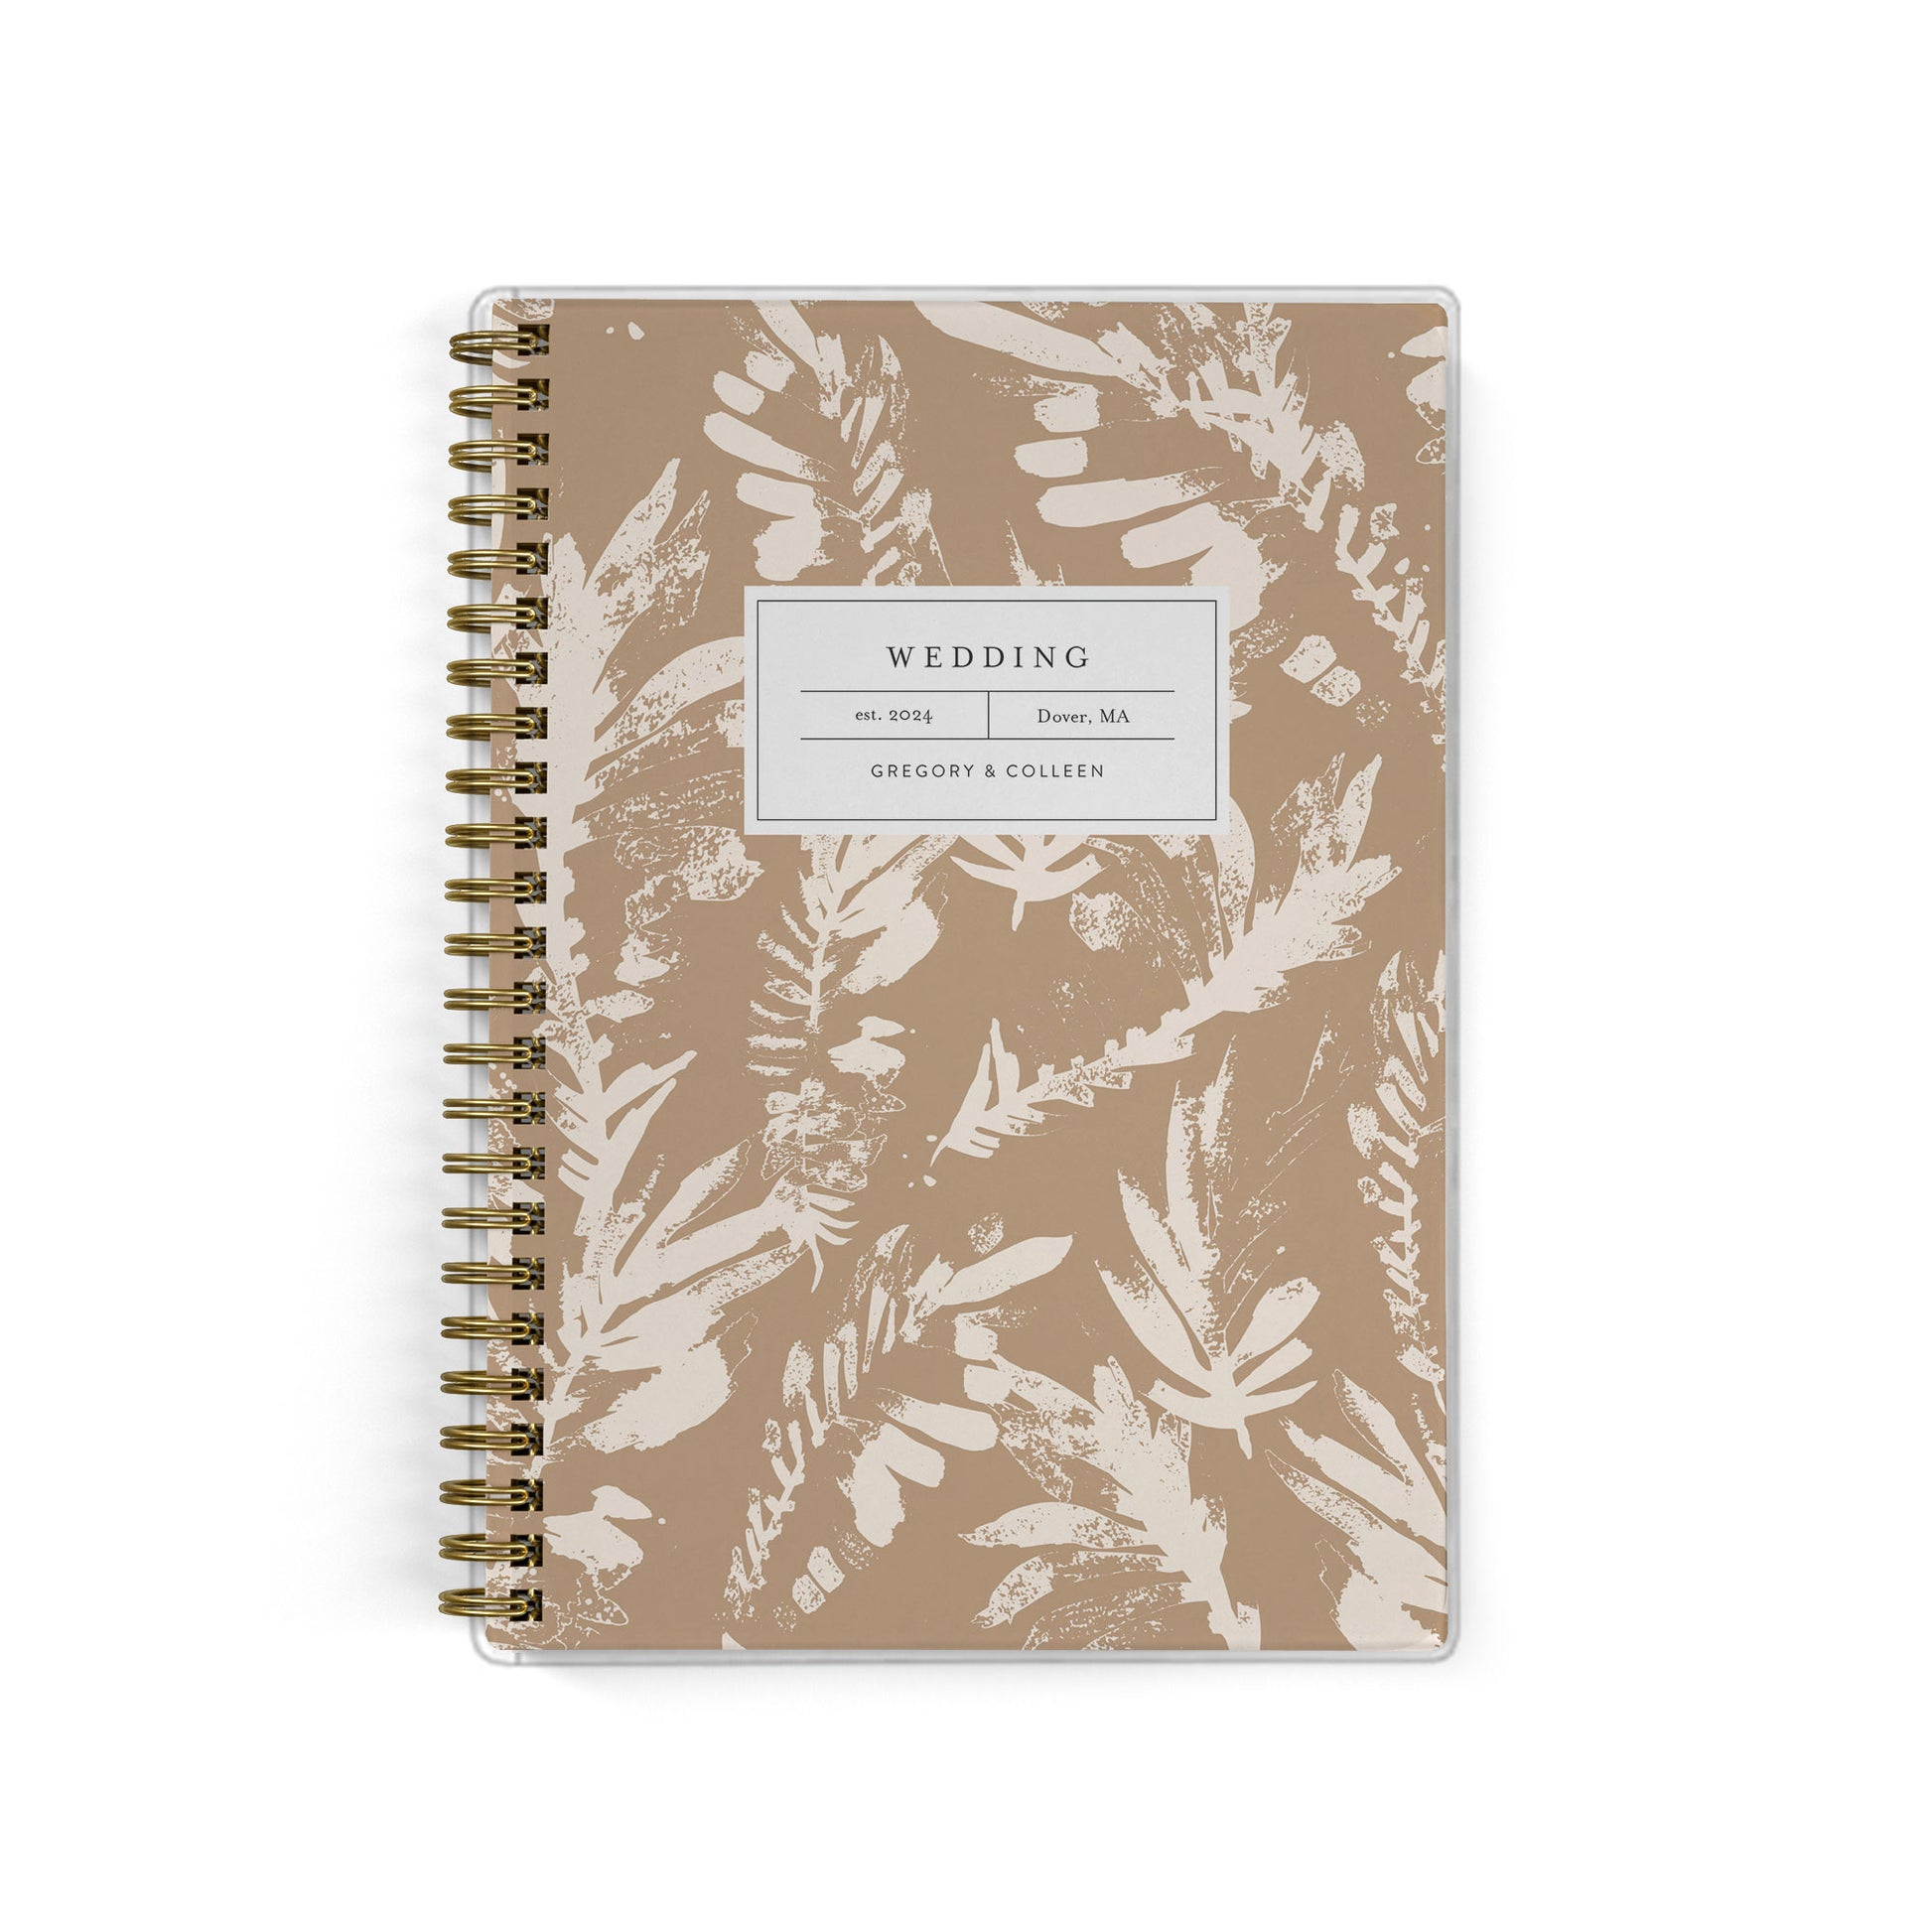 Our exclusive mini wedding planners are perfect for planning small weddings and elopements, shown in a neutral boho leaf print